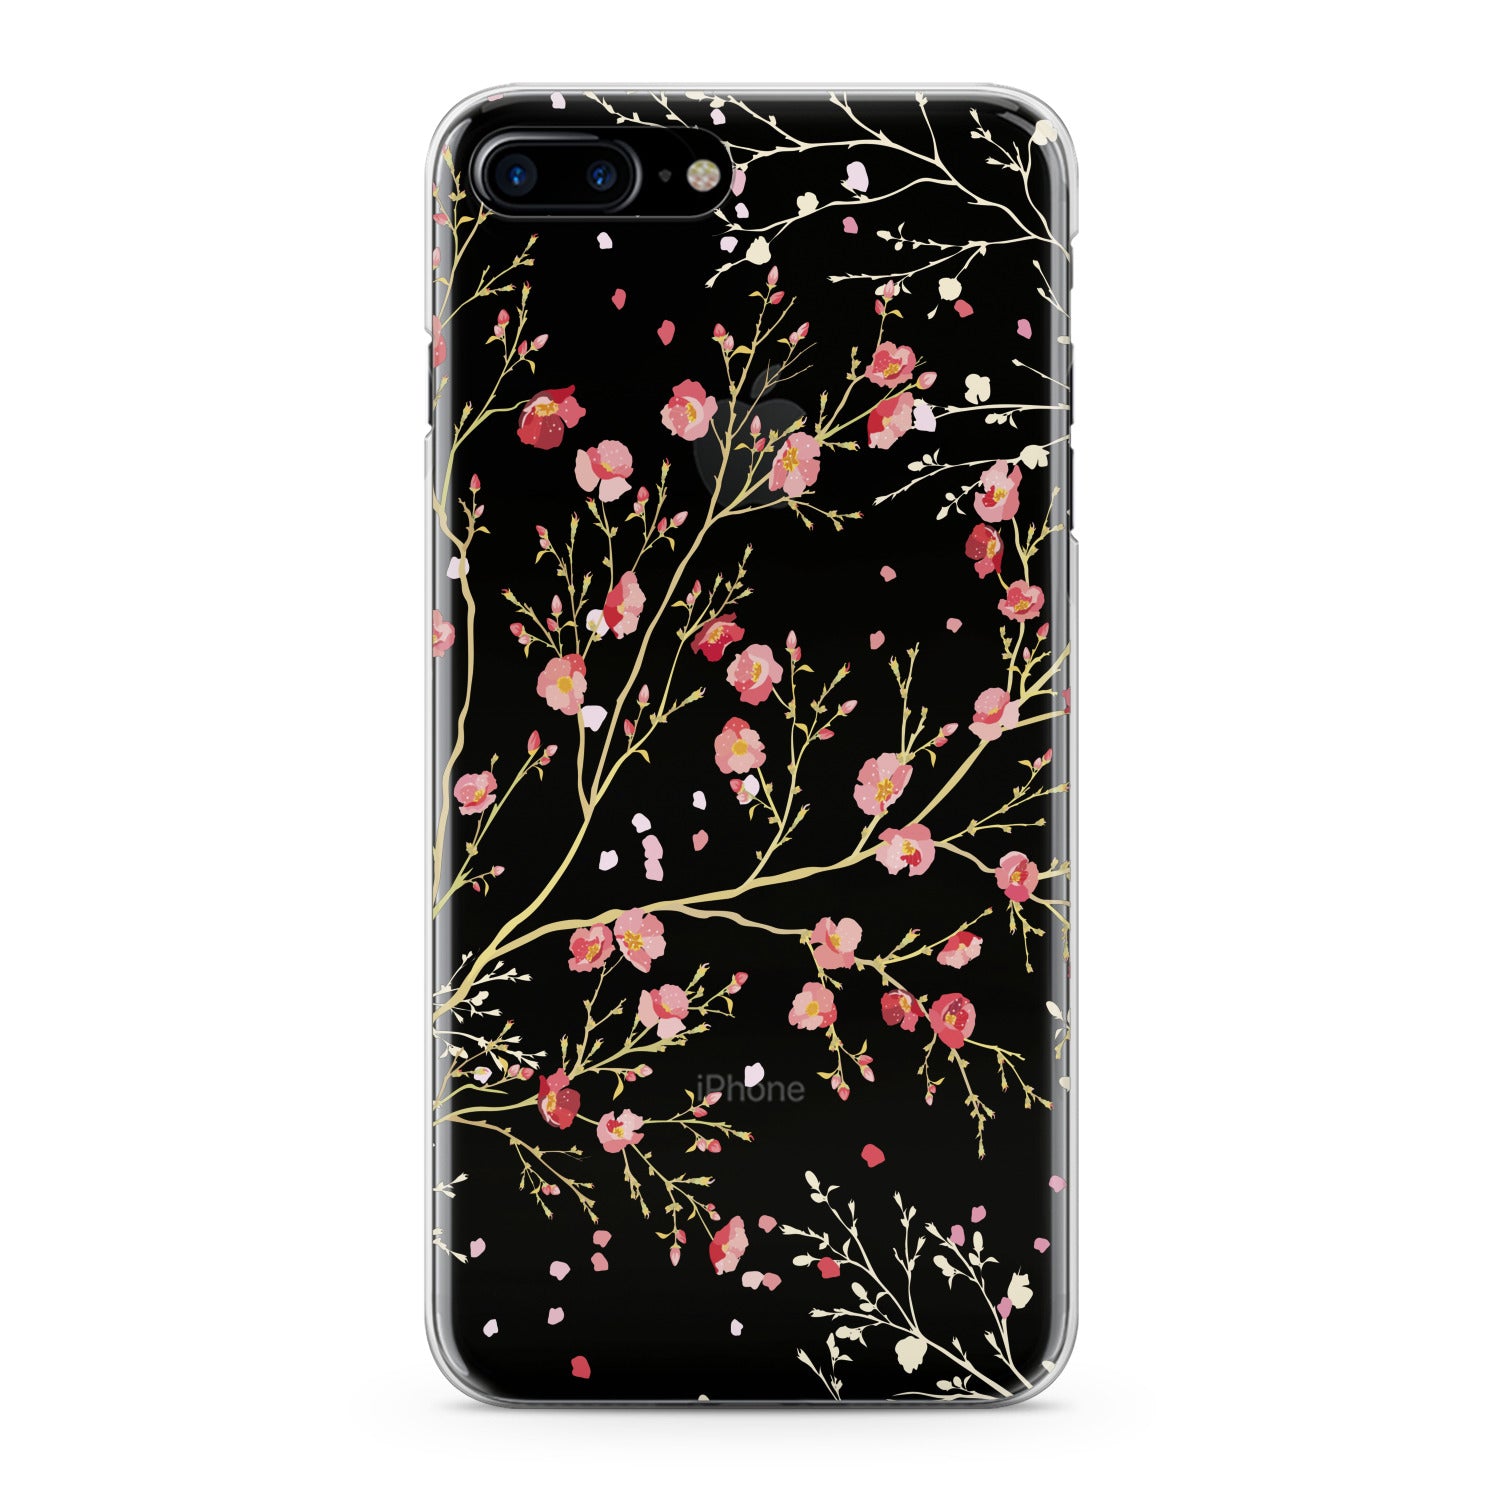 Lex Altern Watercolor Flowers Phone Case for your iPhone & Android phone.